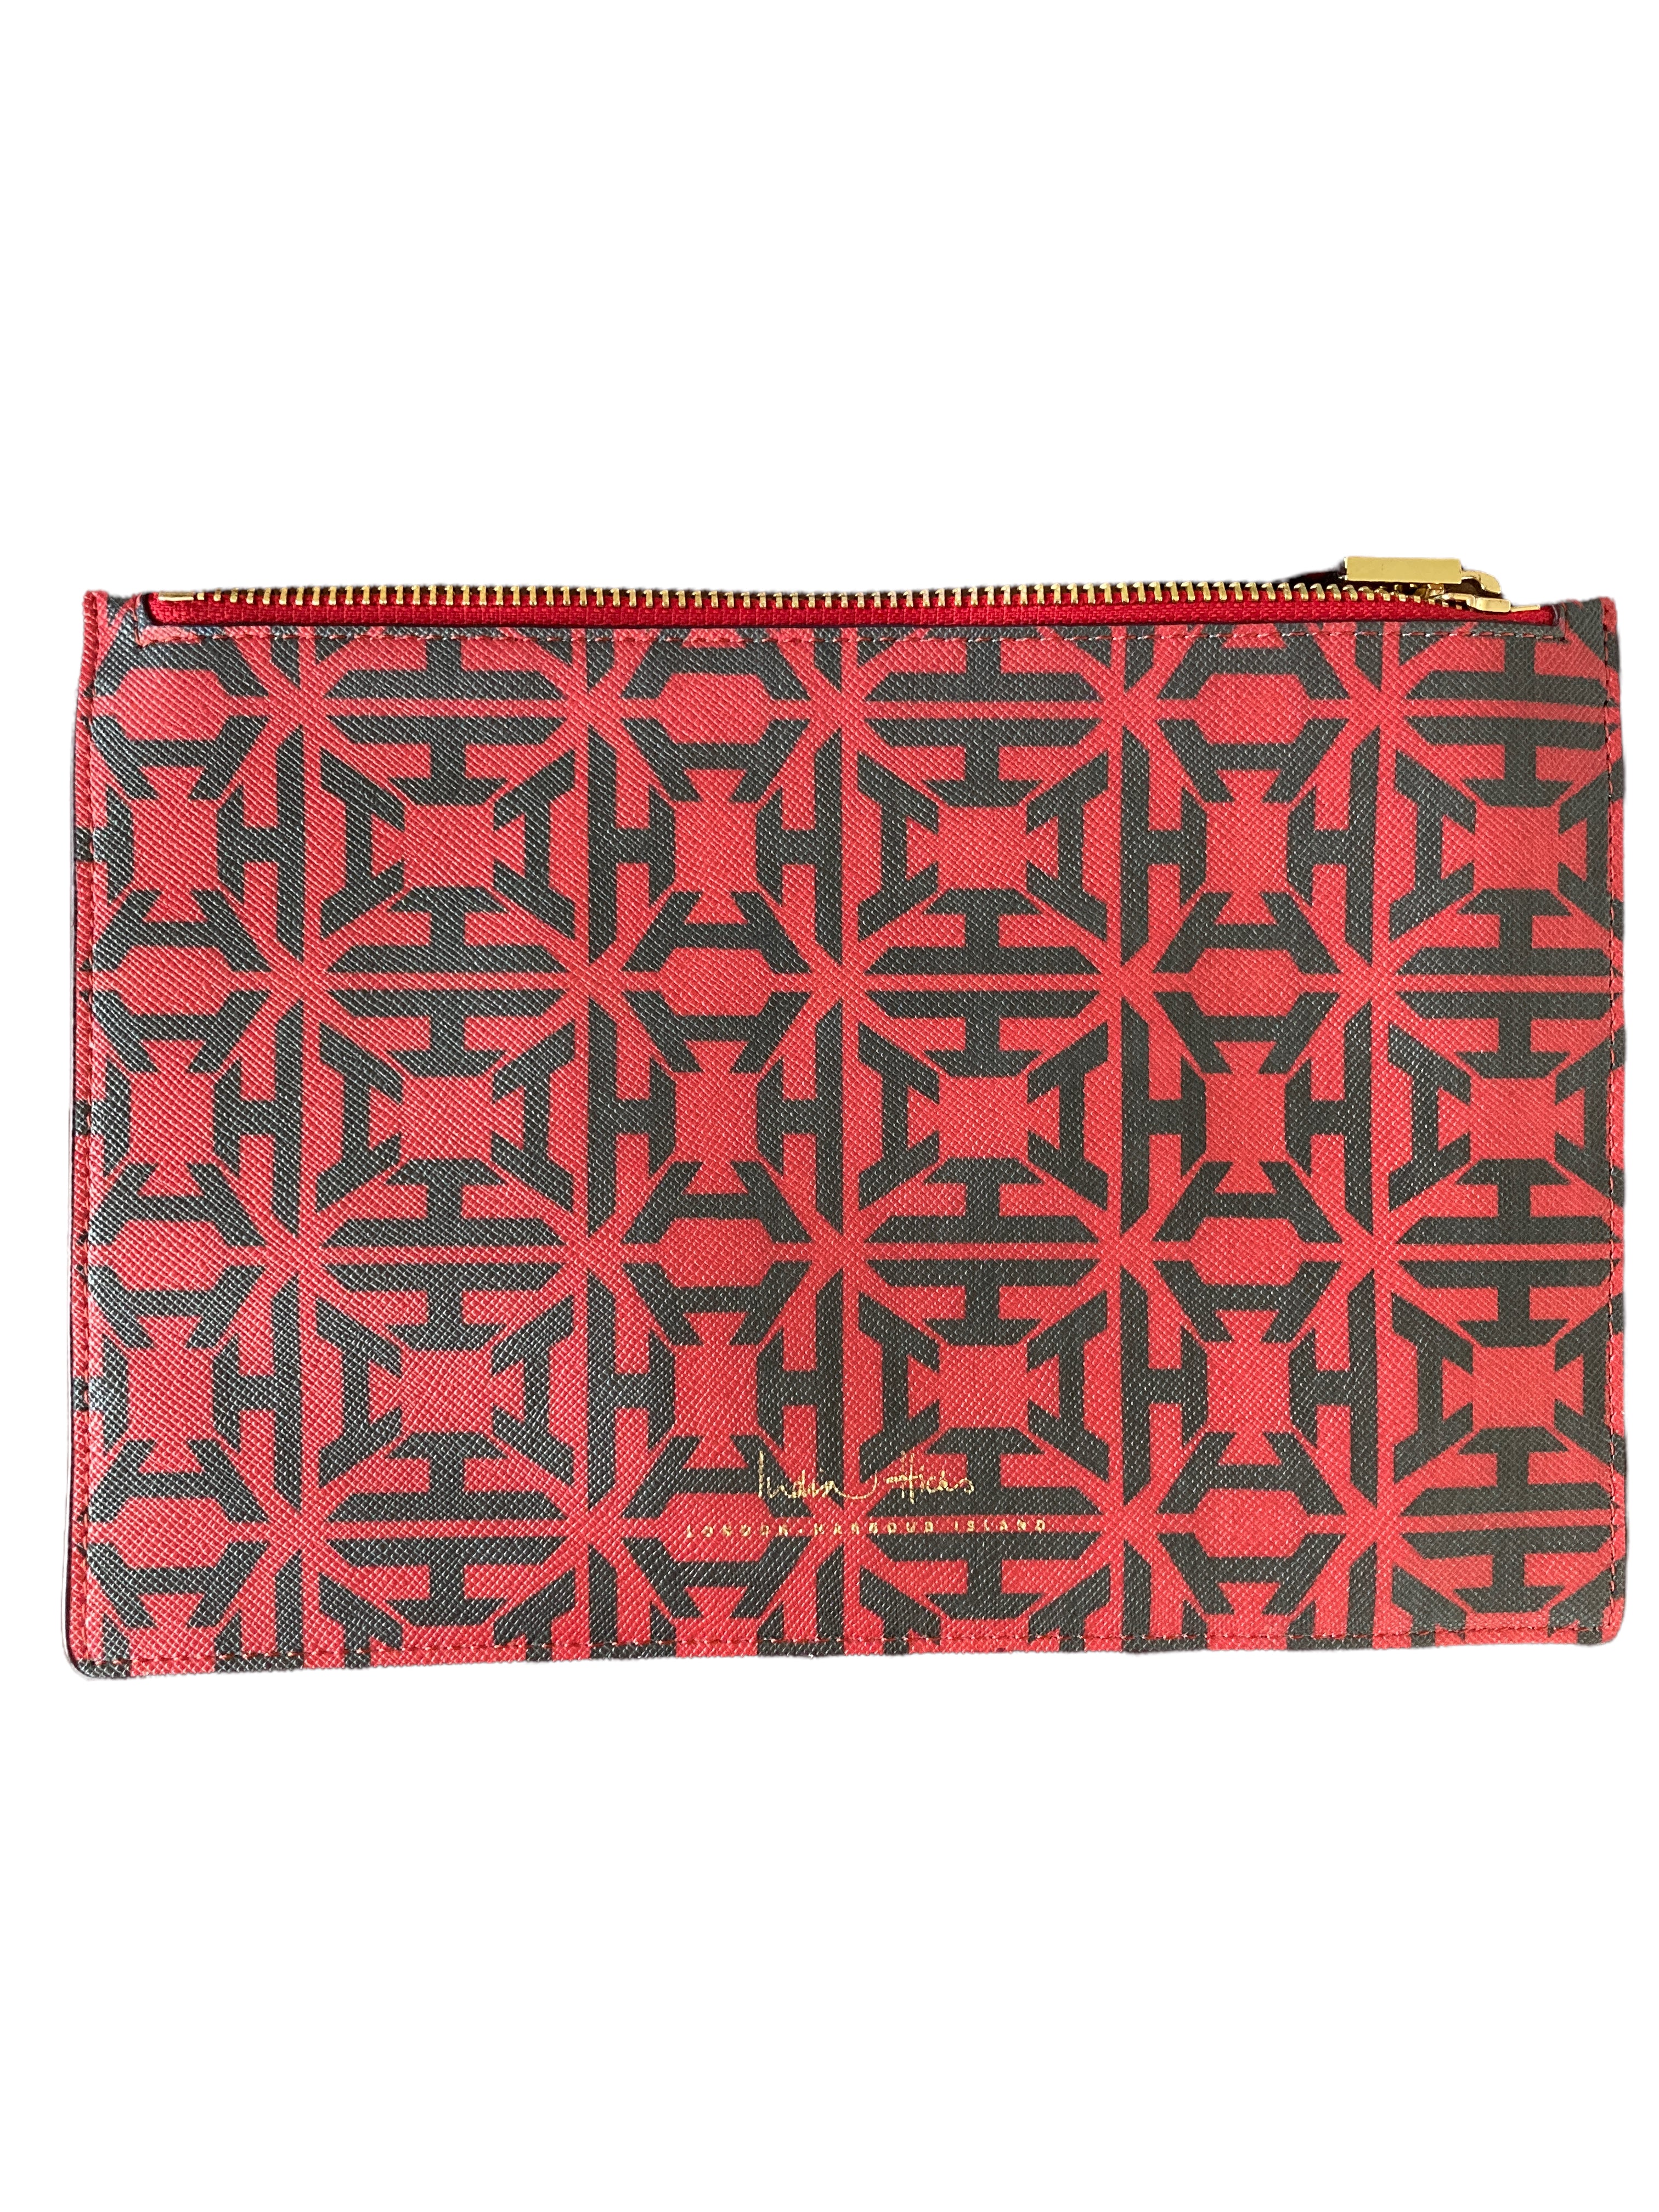 India Hicks Red/Charcoal Flat Stanley Zippered Clutch